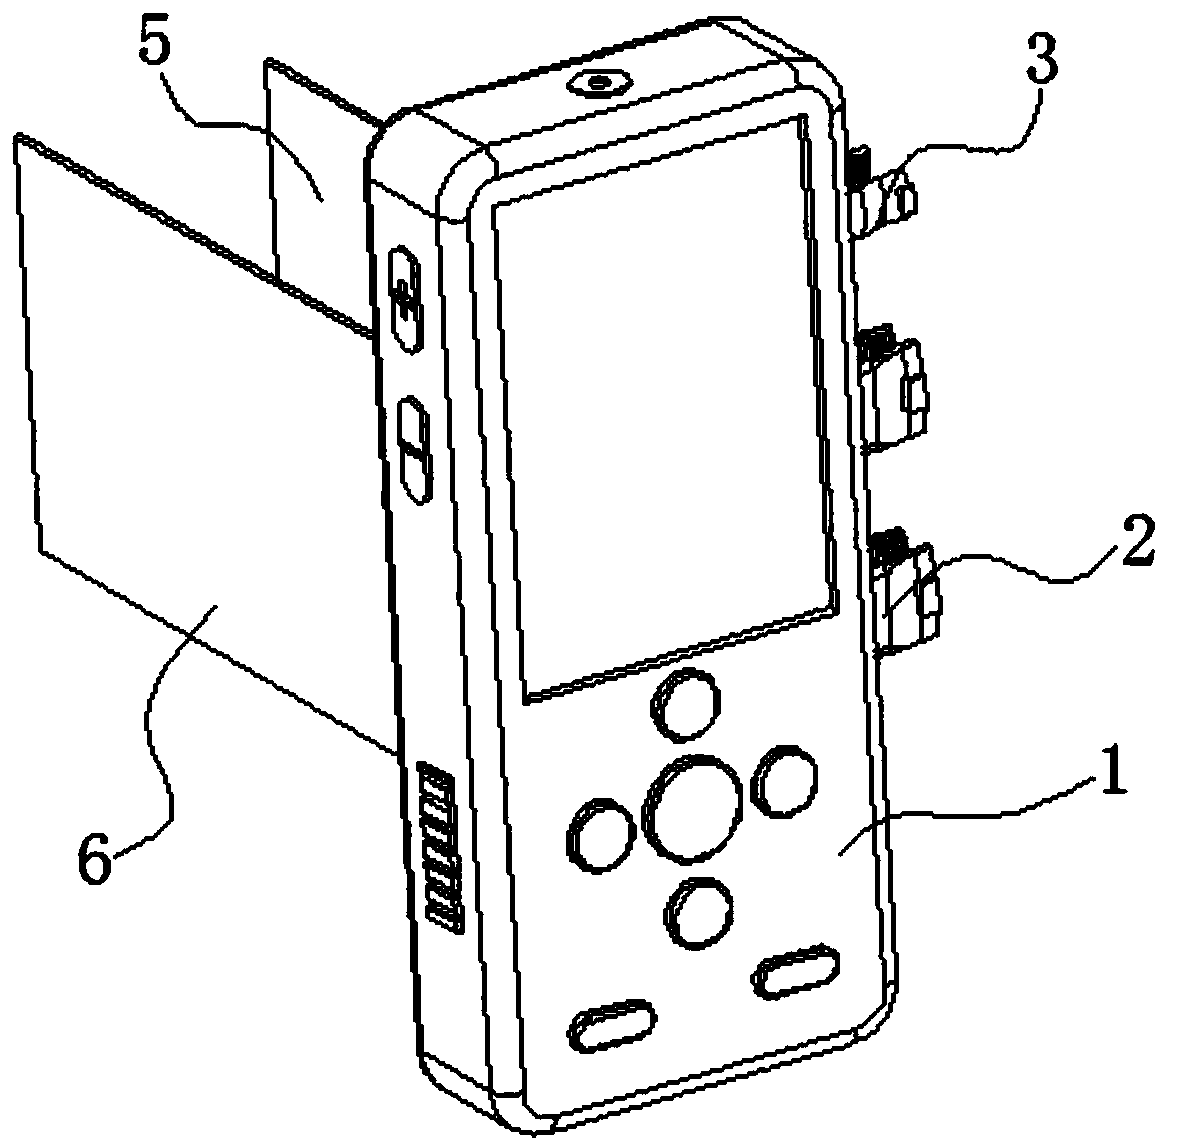 A portable music player